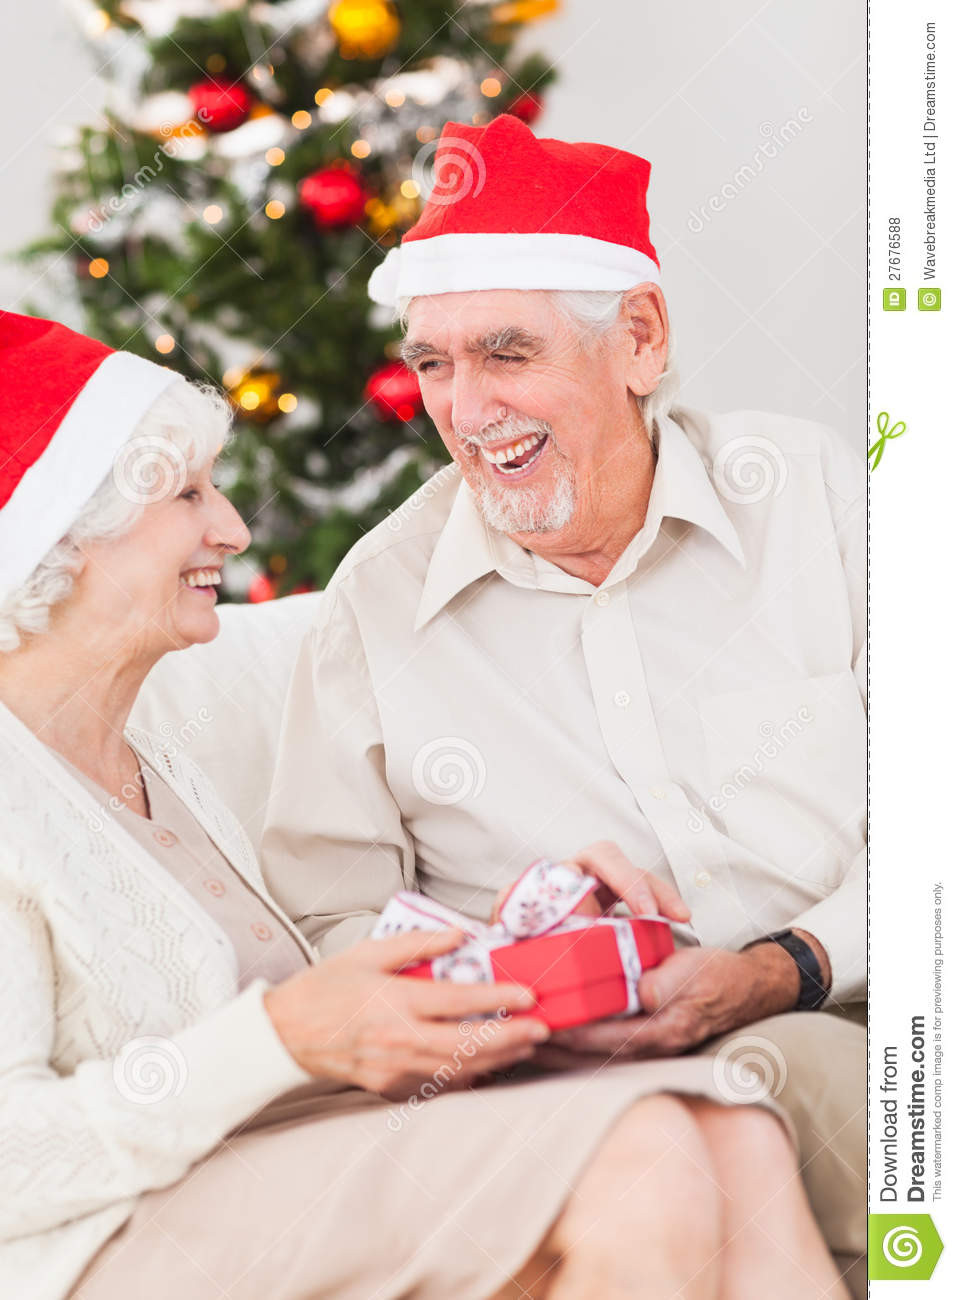 Christmas Gift Ideas For Older Couples
 Elderly Couple Exchanging Christmas Gifts Royalty Free